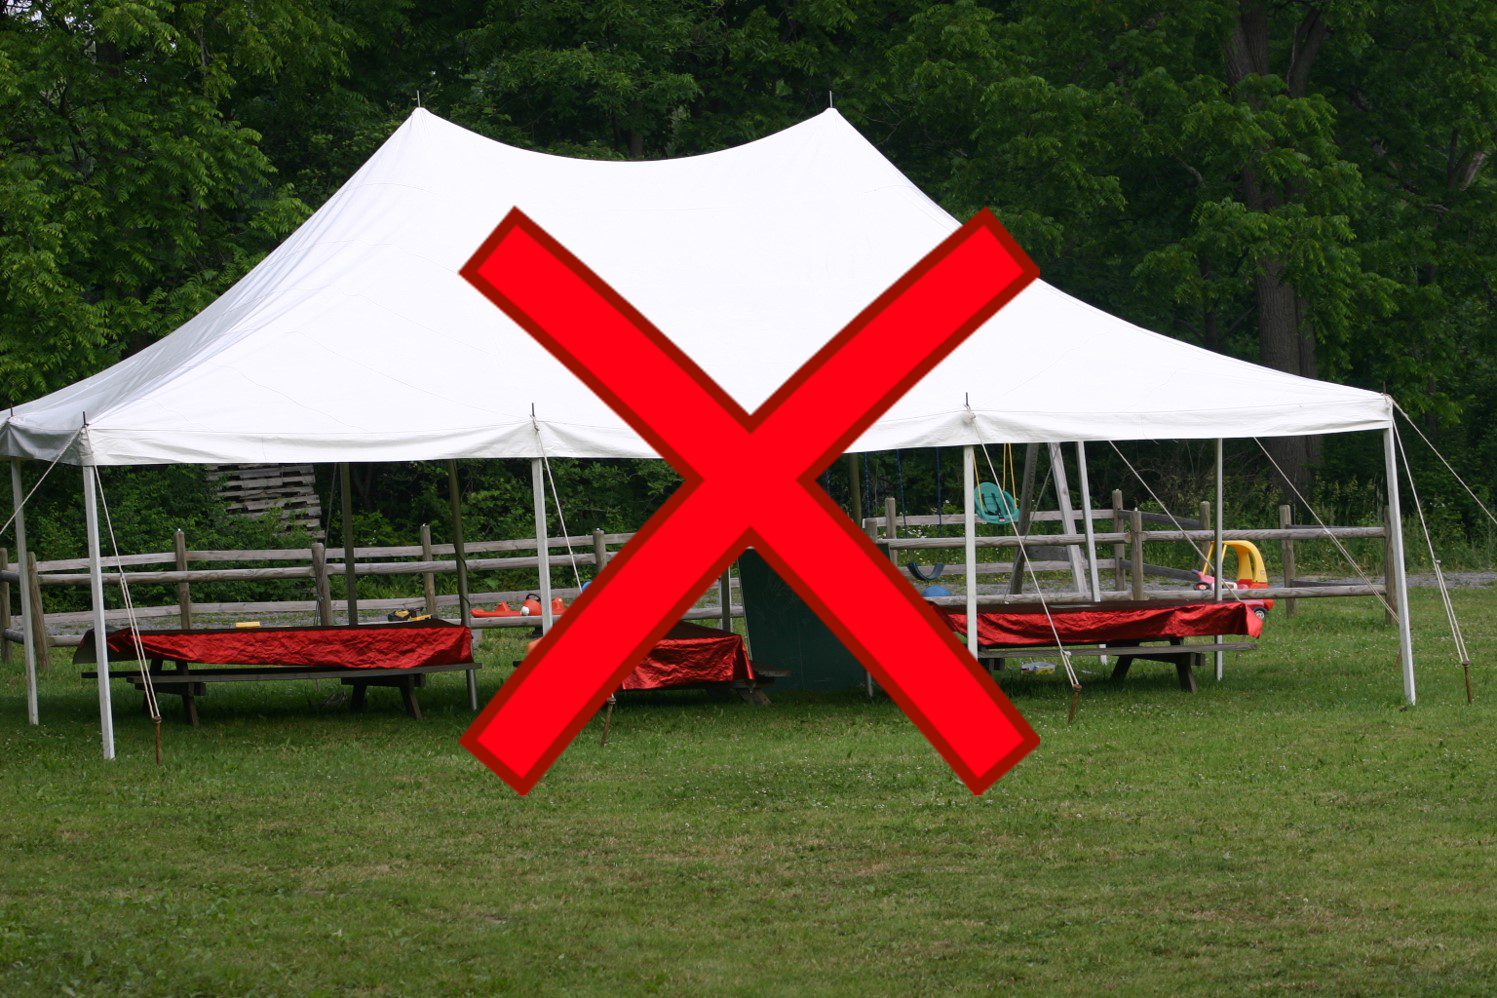 Picnic tables under tent with red x through image